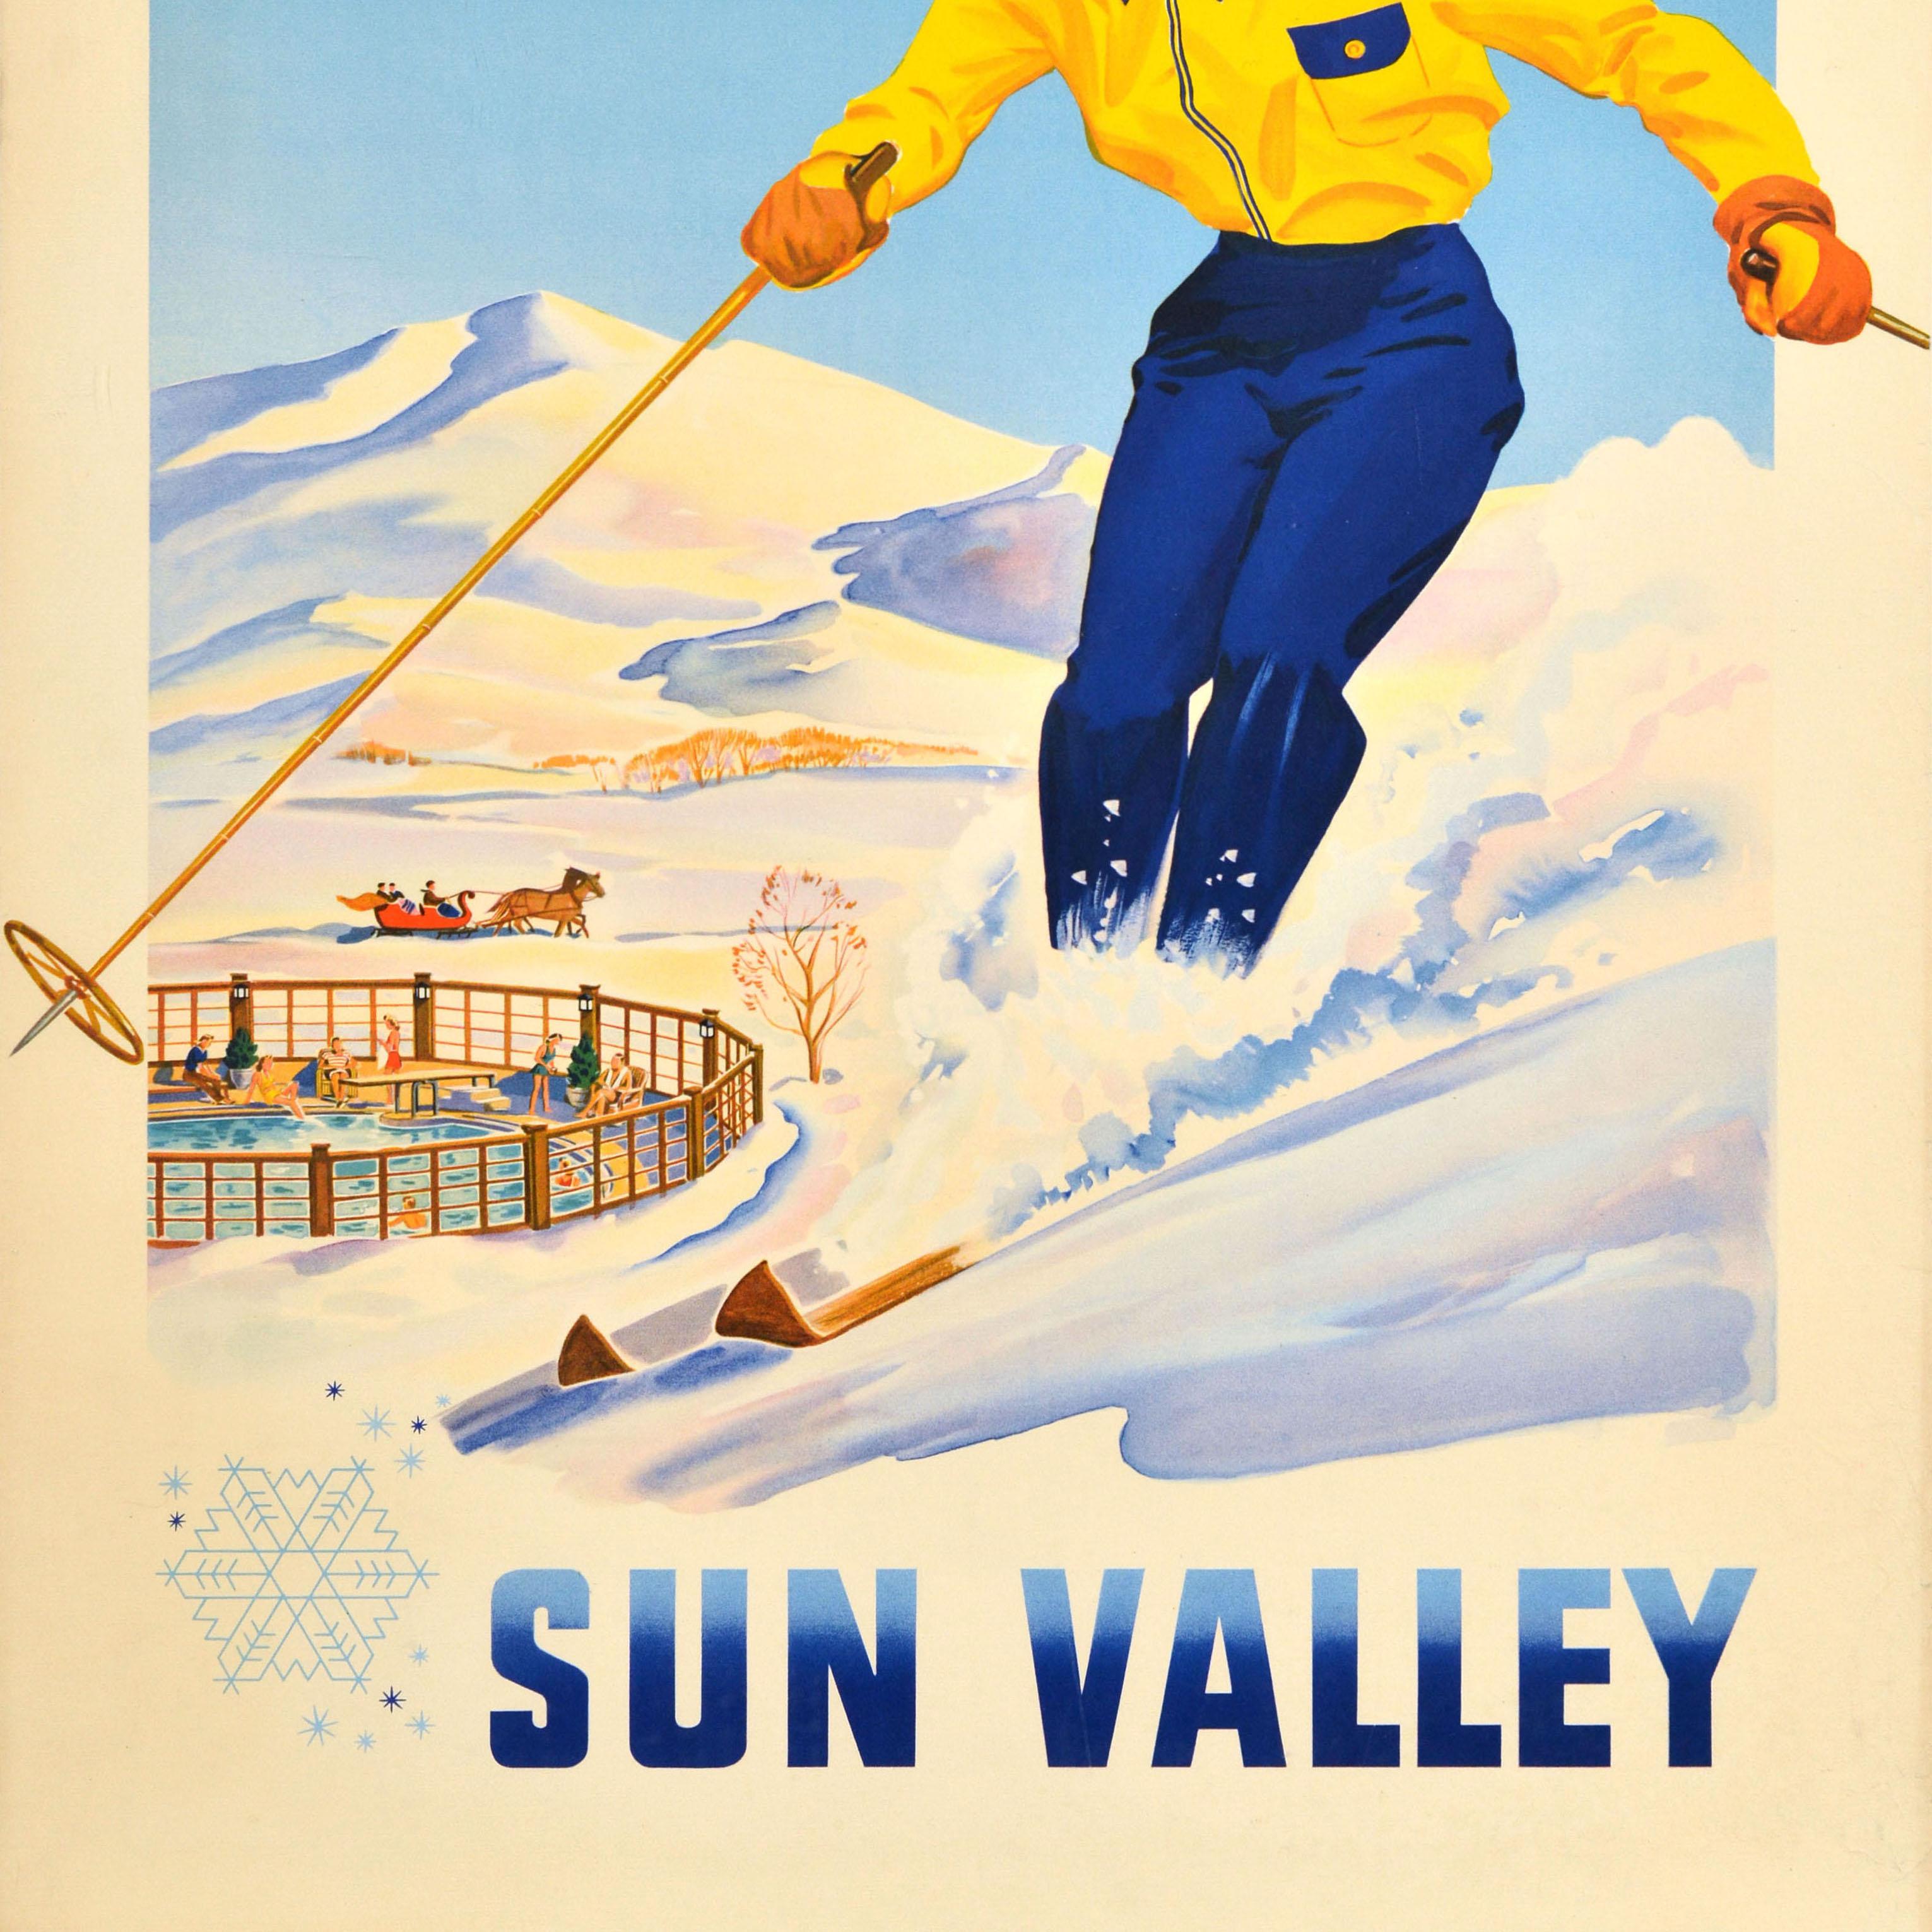 Original Vintage Winter Ski Sports Travel Poster This Winter Sun Valley Idaho In Good Condition For Sale In London, GB